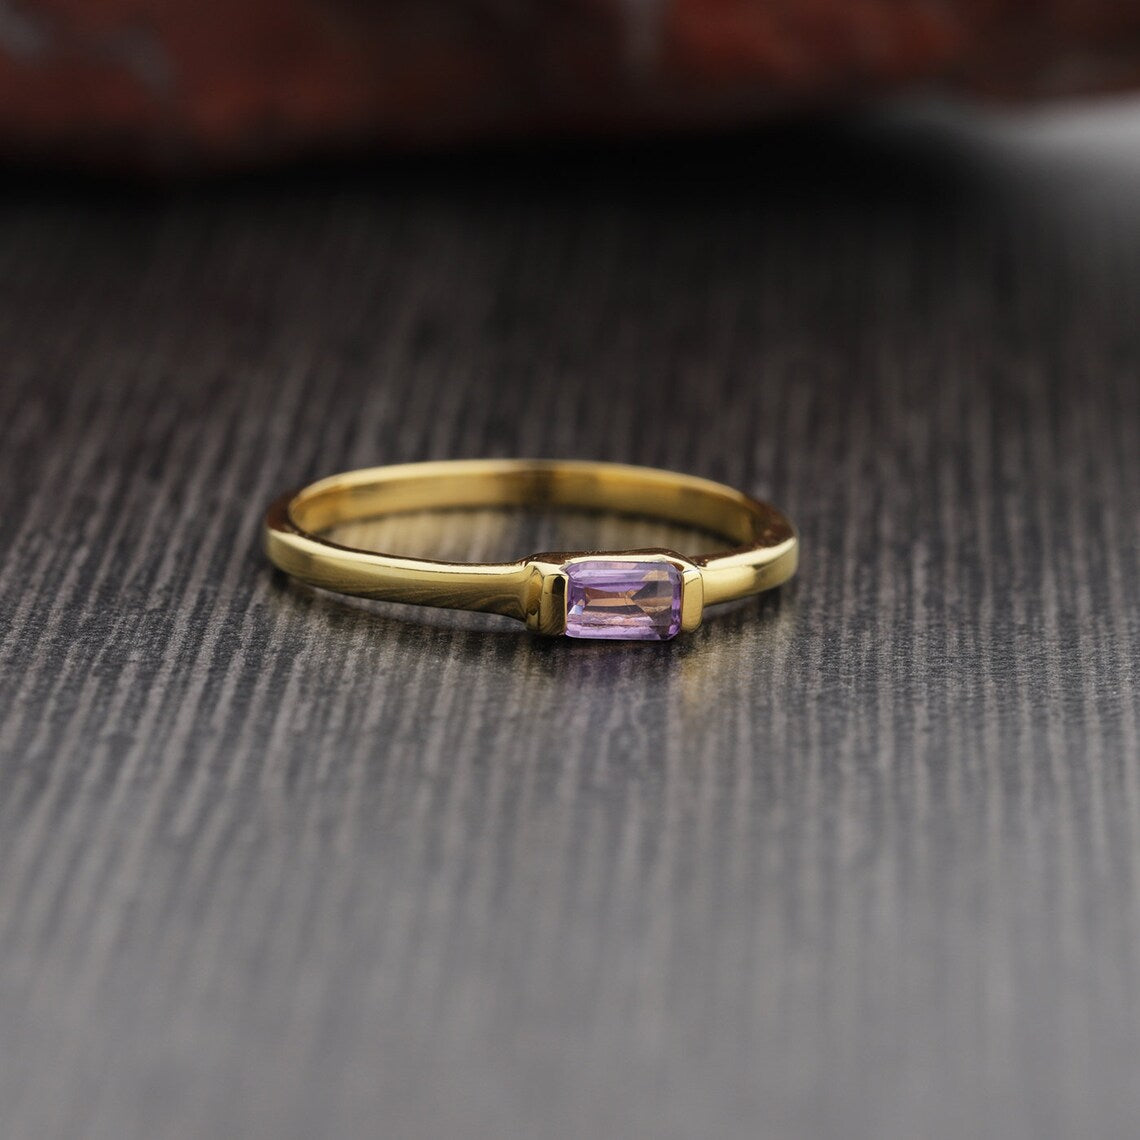 Gold Plated - Sterling 925 Silver Amethyst Ring, Natural Amethyst February Gemstone, Handmade Vermeil Gold Stacking Ring, Dainty Minimalist Women's Gifting Jewelry